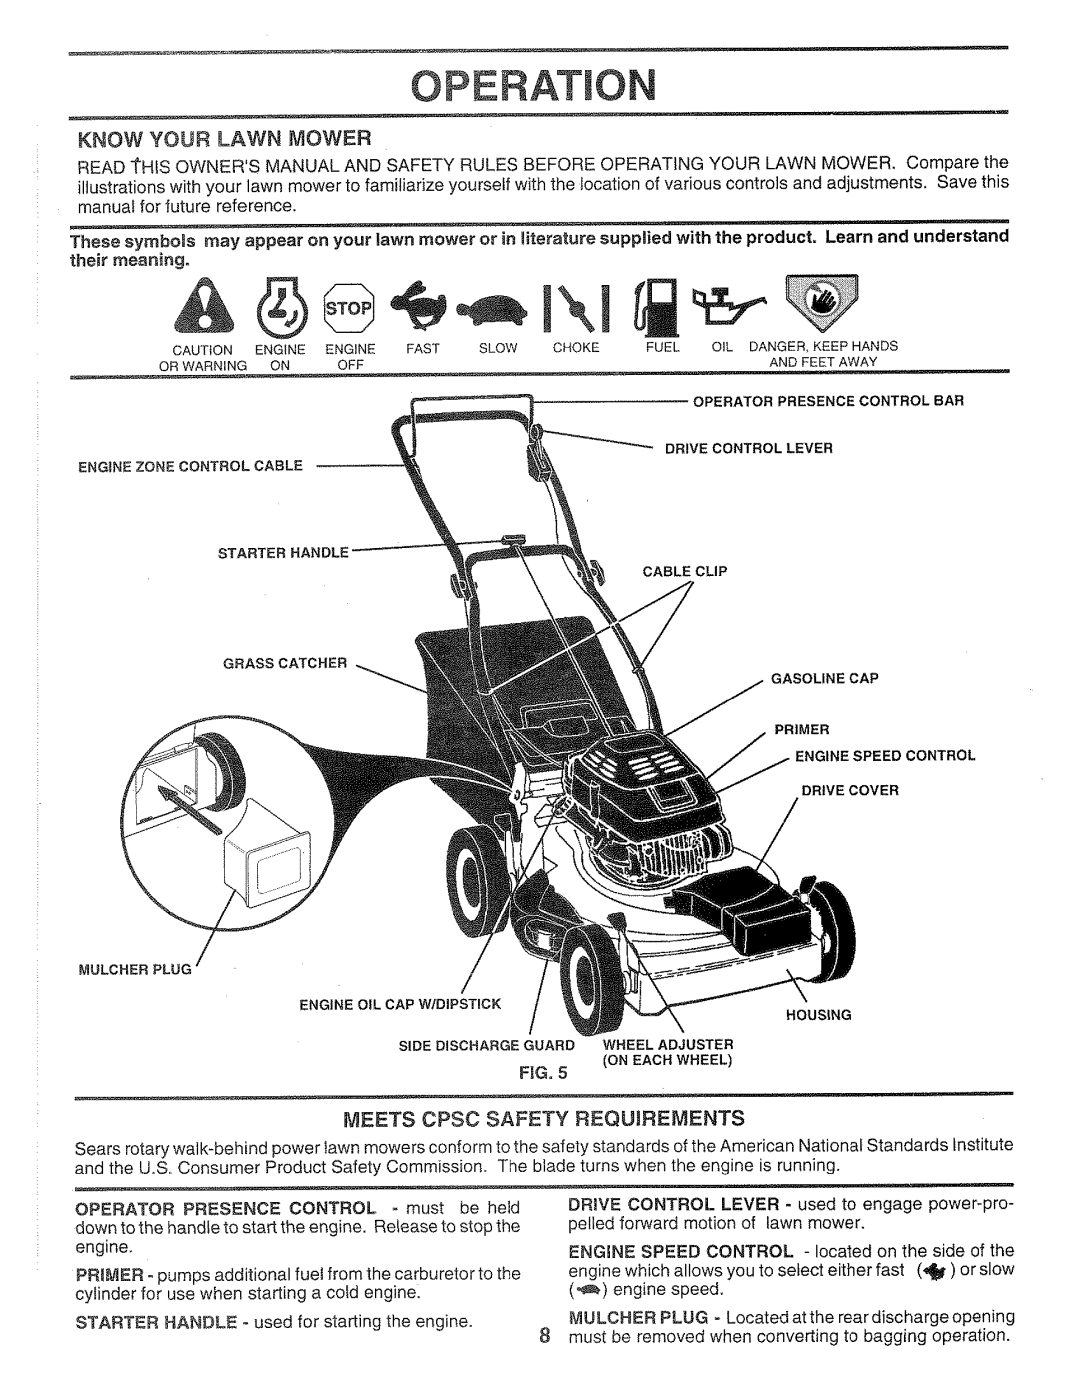 Sears 917.372851 owner manual Operation, Know Your Lawn Mower, Meets Cpsc Safety Requirements 